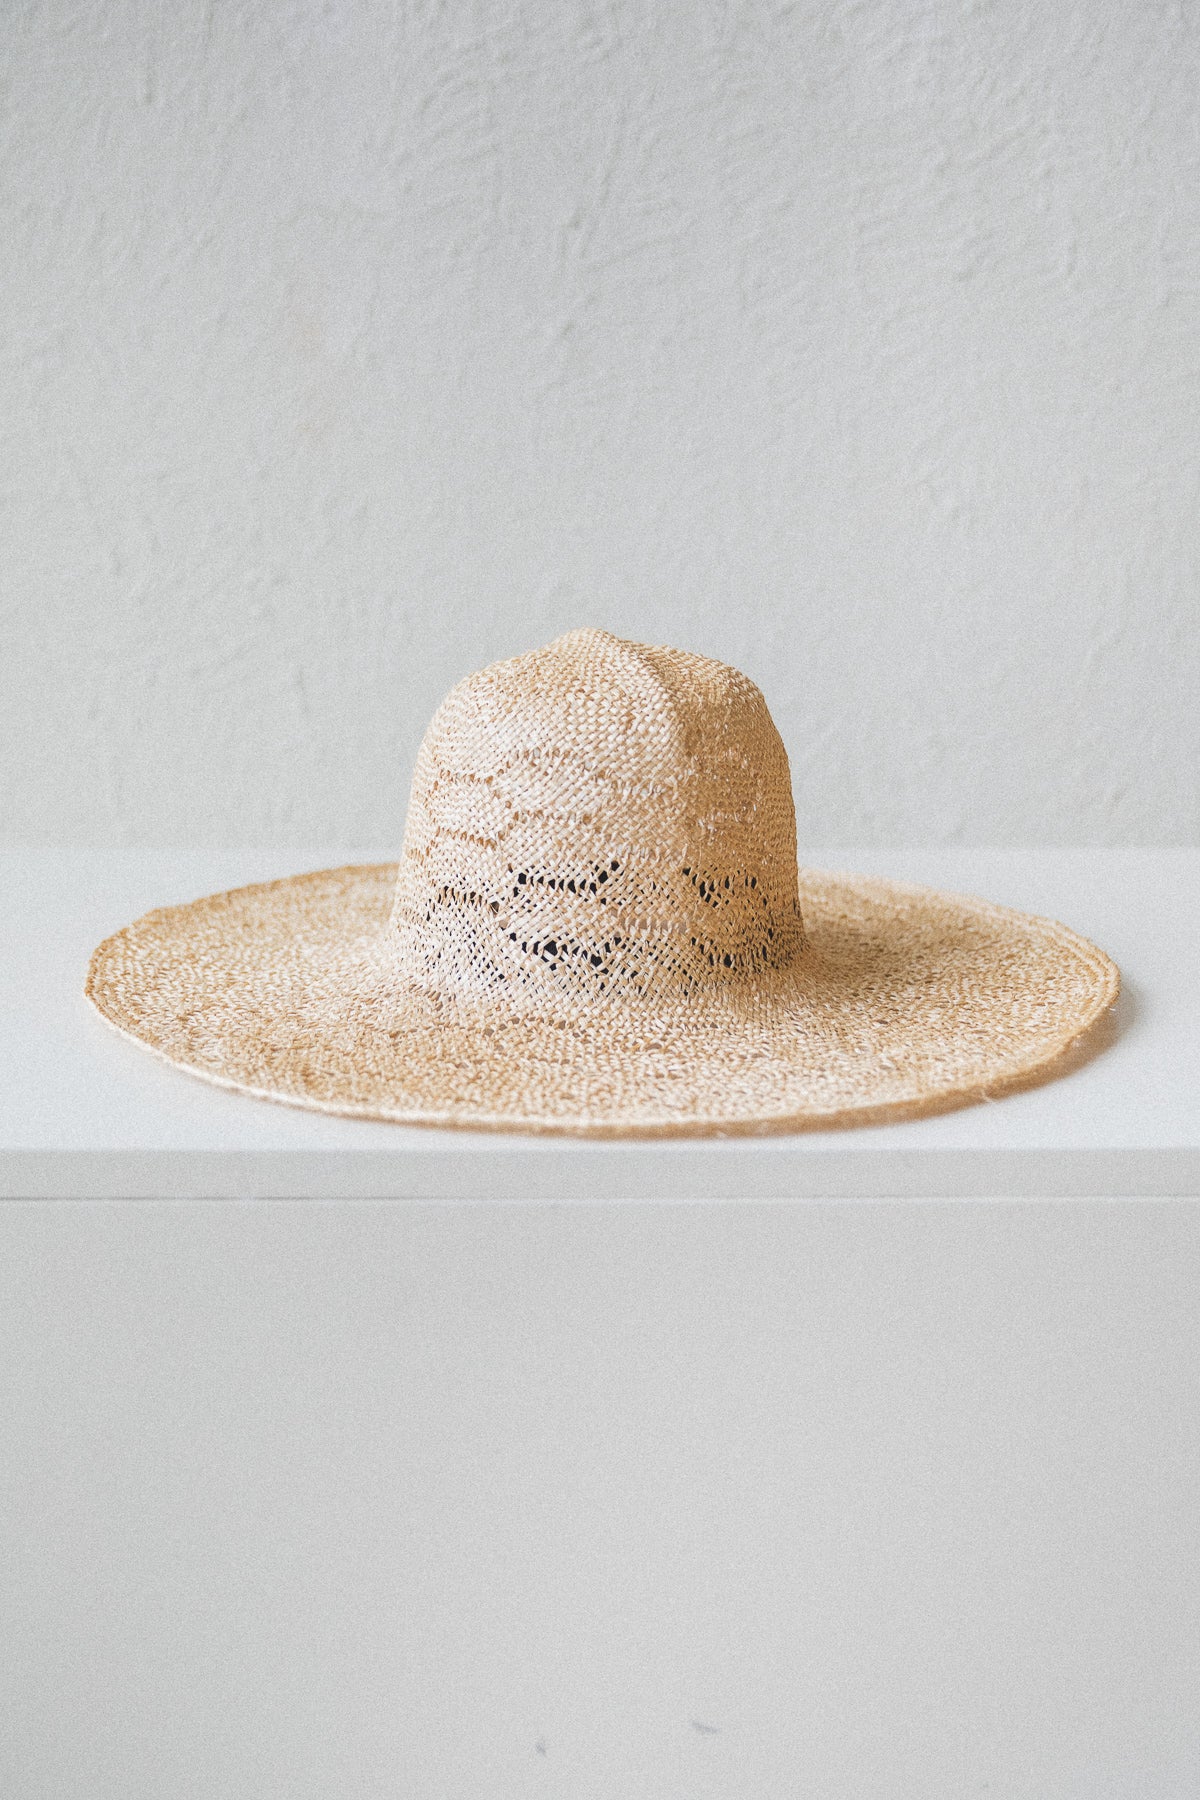 OPTIMO PACKABLE HAT IN HONEYCOMB